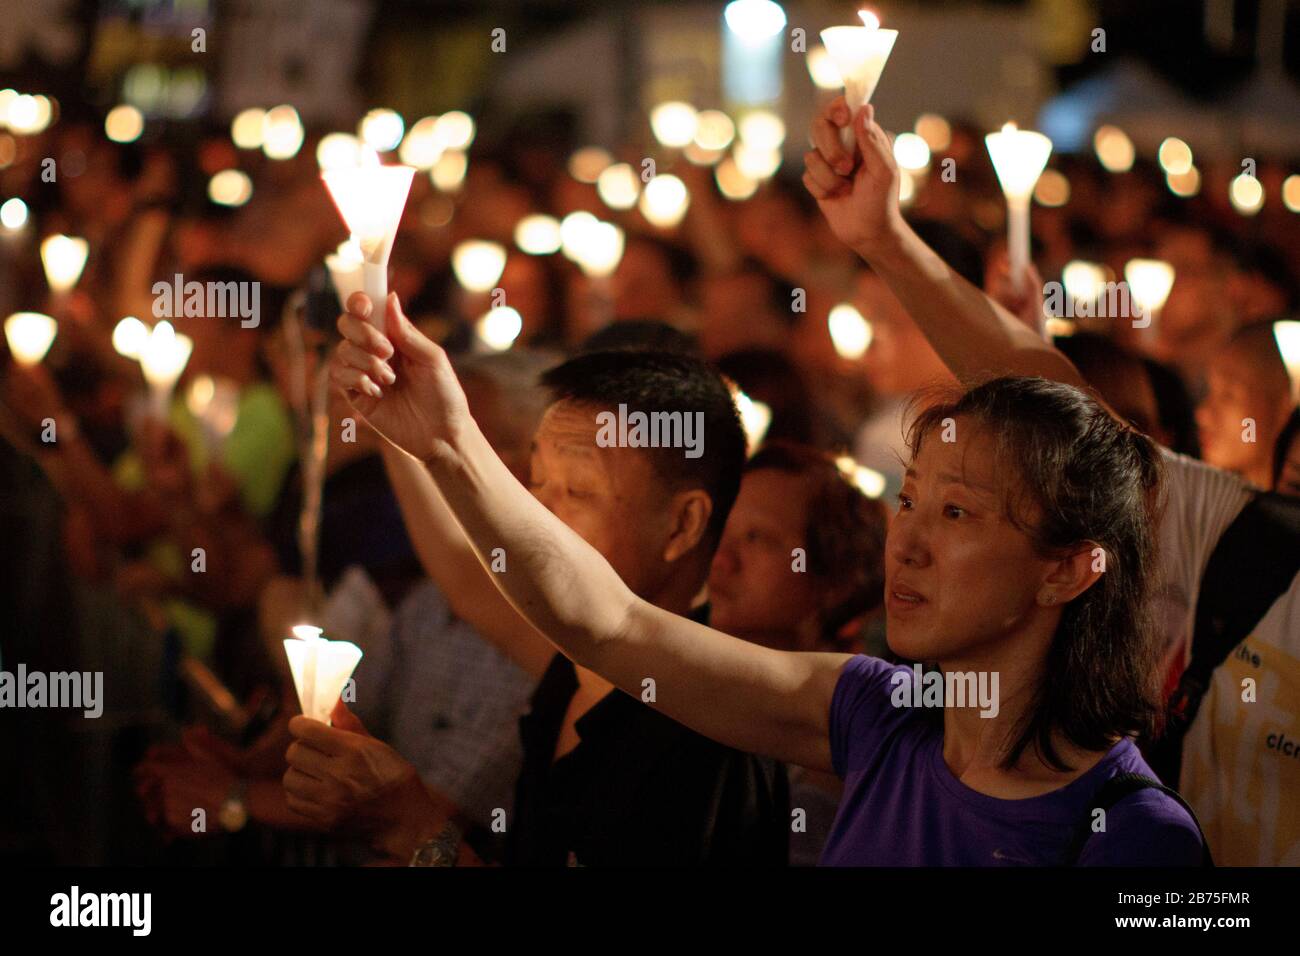 Thousands of people gather in Victoria Park to commemorate the 4 June 1989 massacre in Hong Kong, China, 04 June 2018. They also demand the end of the one-party rule in China and paid tribute to the deceased Chinese dissident and Nobel laureate Liu Xiaobo. Hong Kong is the only place on Chinese territory where such a vigil is allowed. Stock Photo